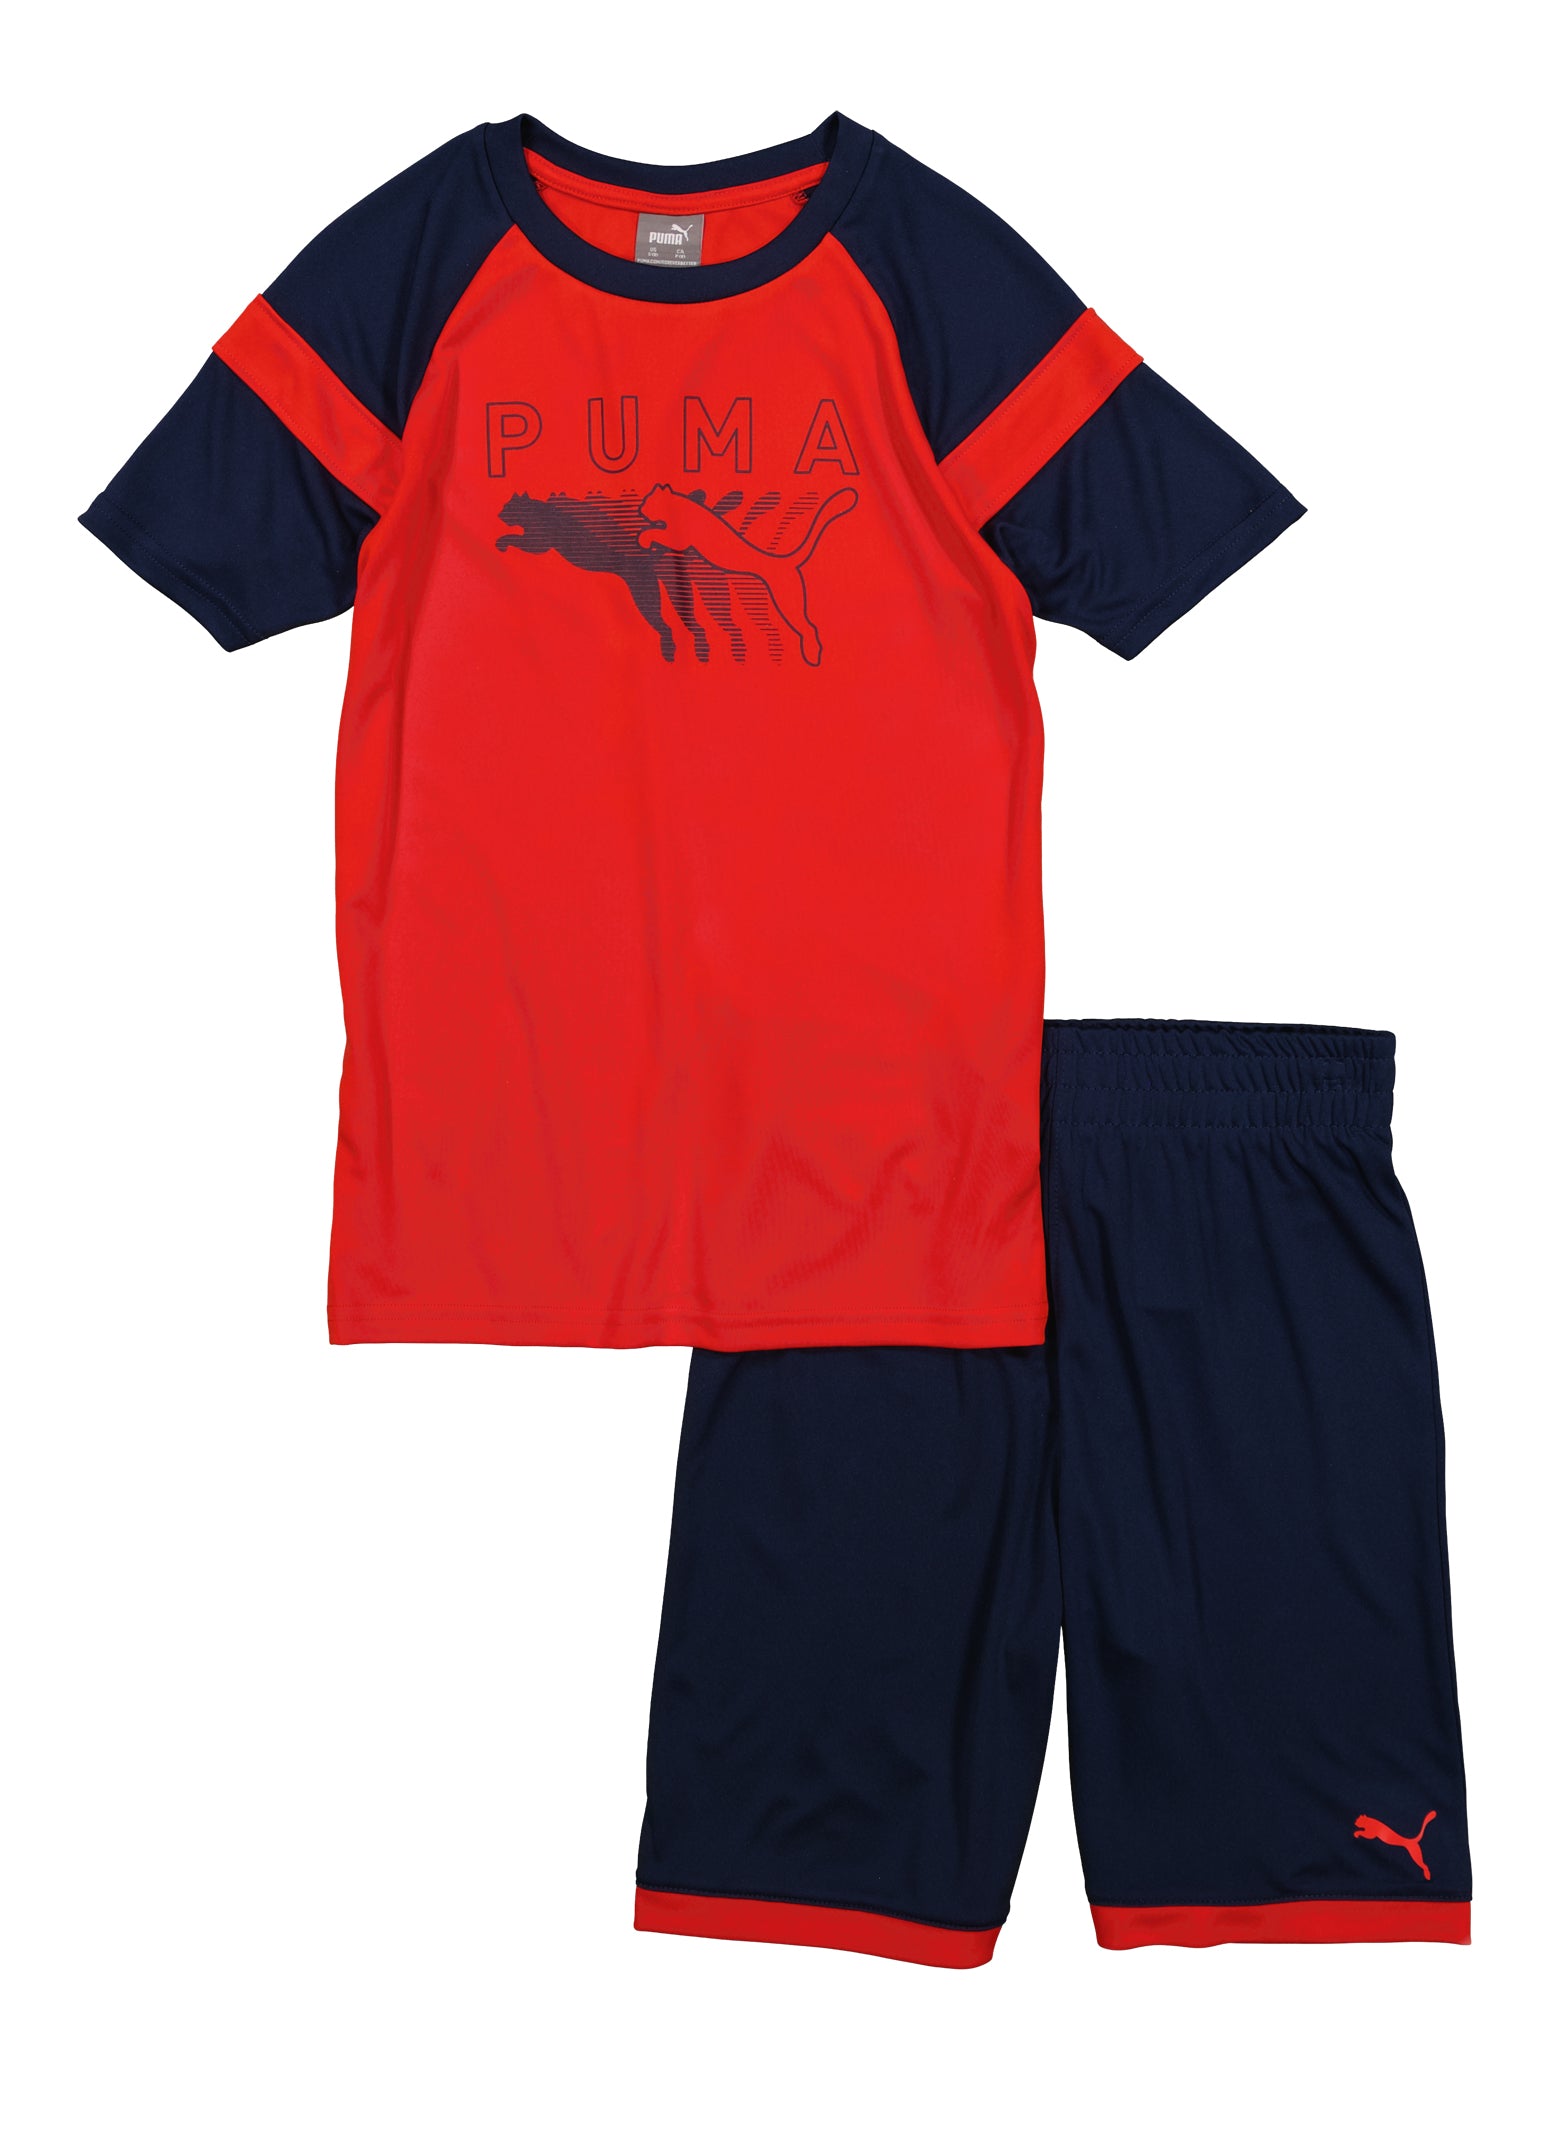 Boys Puma Color Bock Graphic Tee and Shorts, Red, Size 14-16